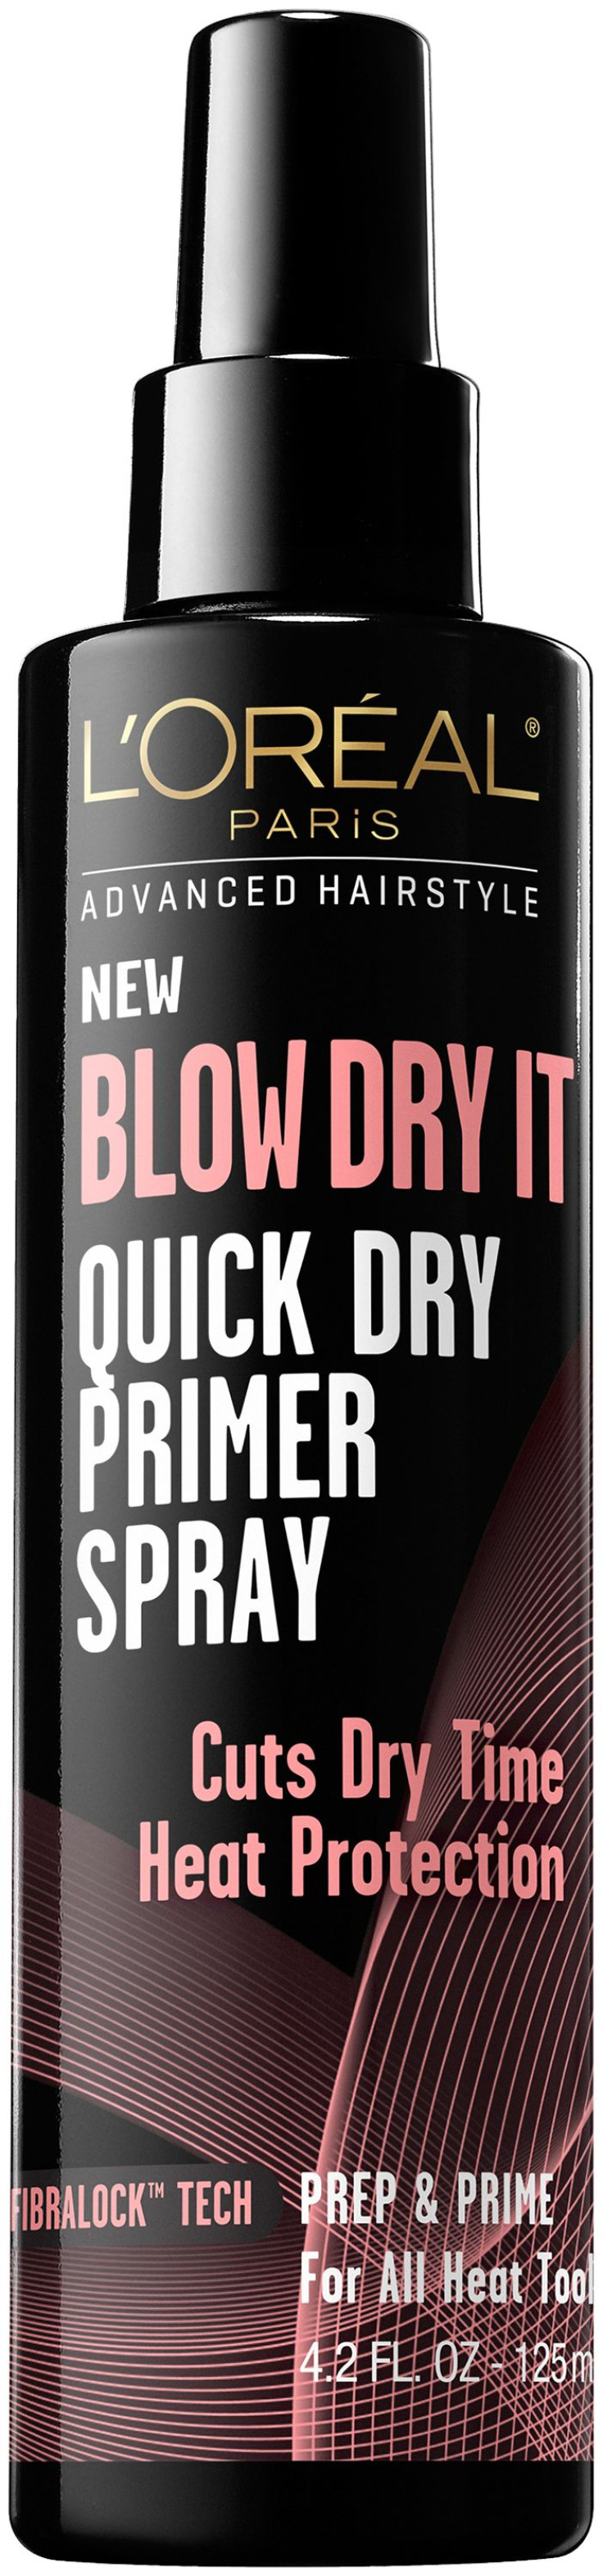 L'Oreal Paris Advanced Hairstyle Blow Dry It-Quick Dry Primer Spray